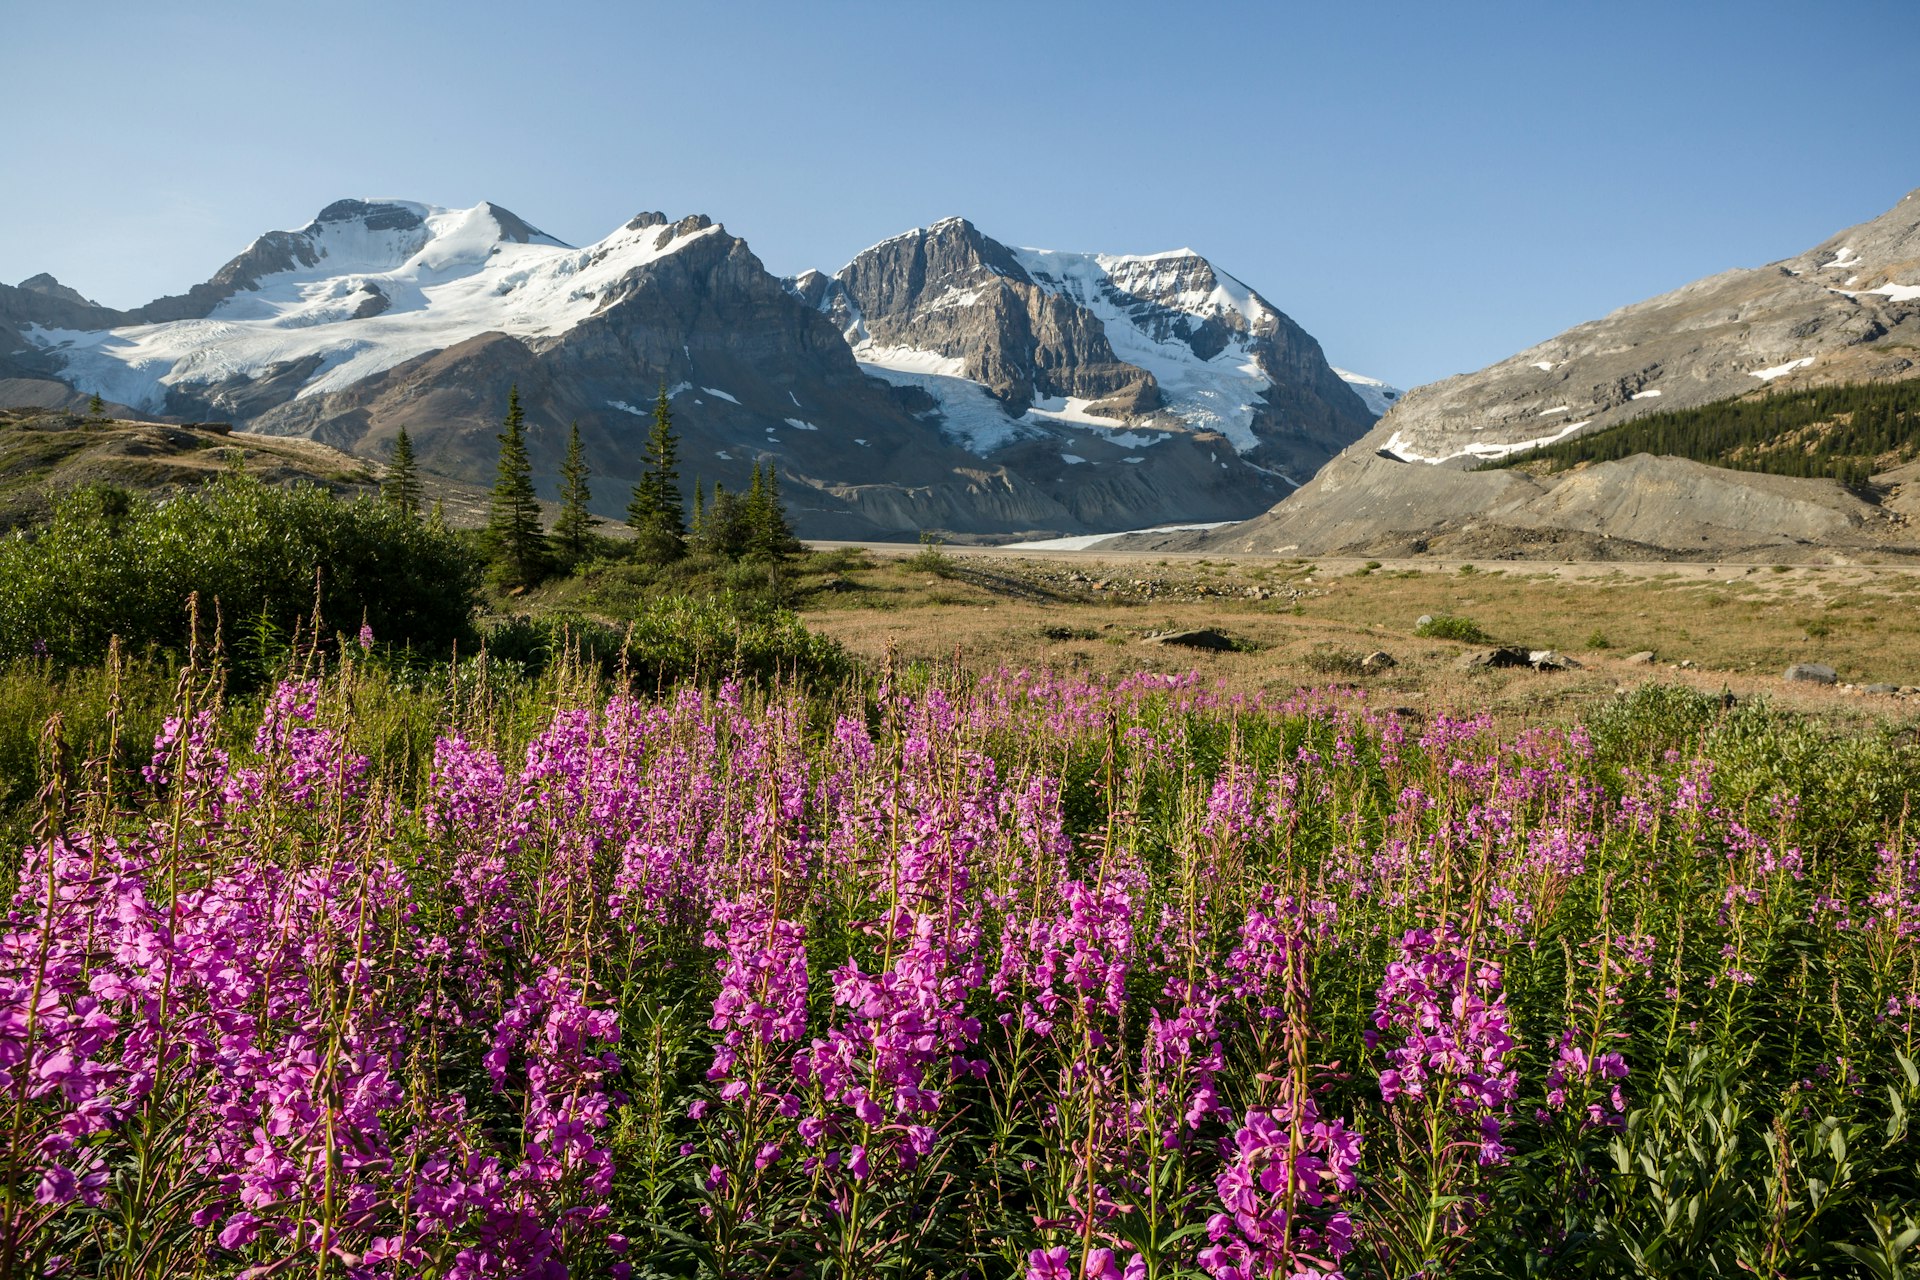 Mount Athabasca in Canada from Icefields Parkway, with wild flowers in the foreground